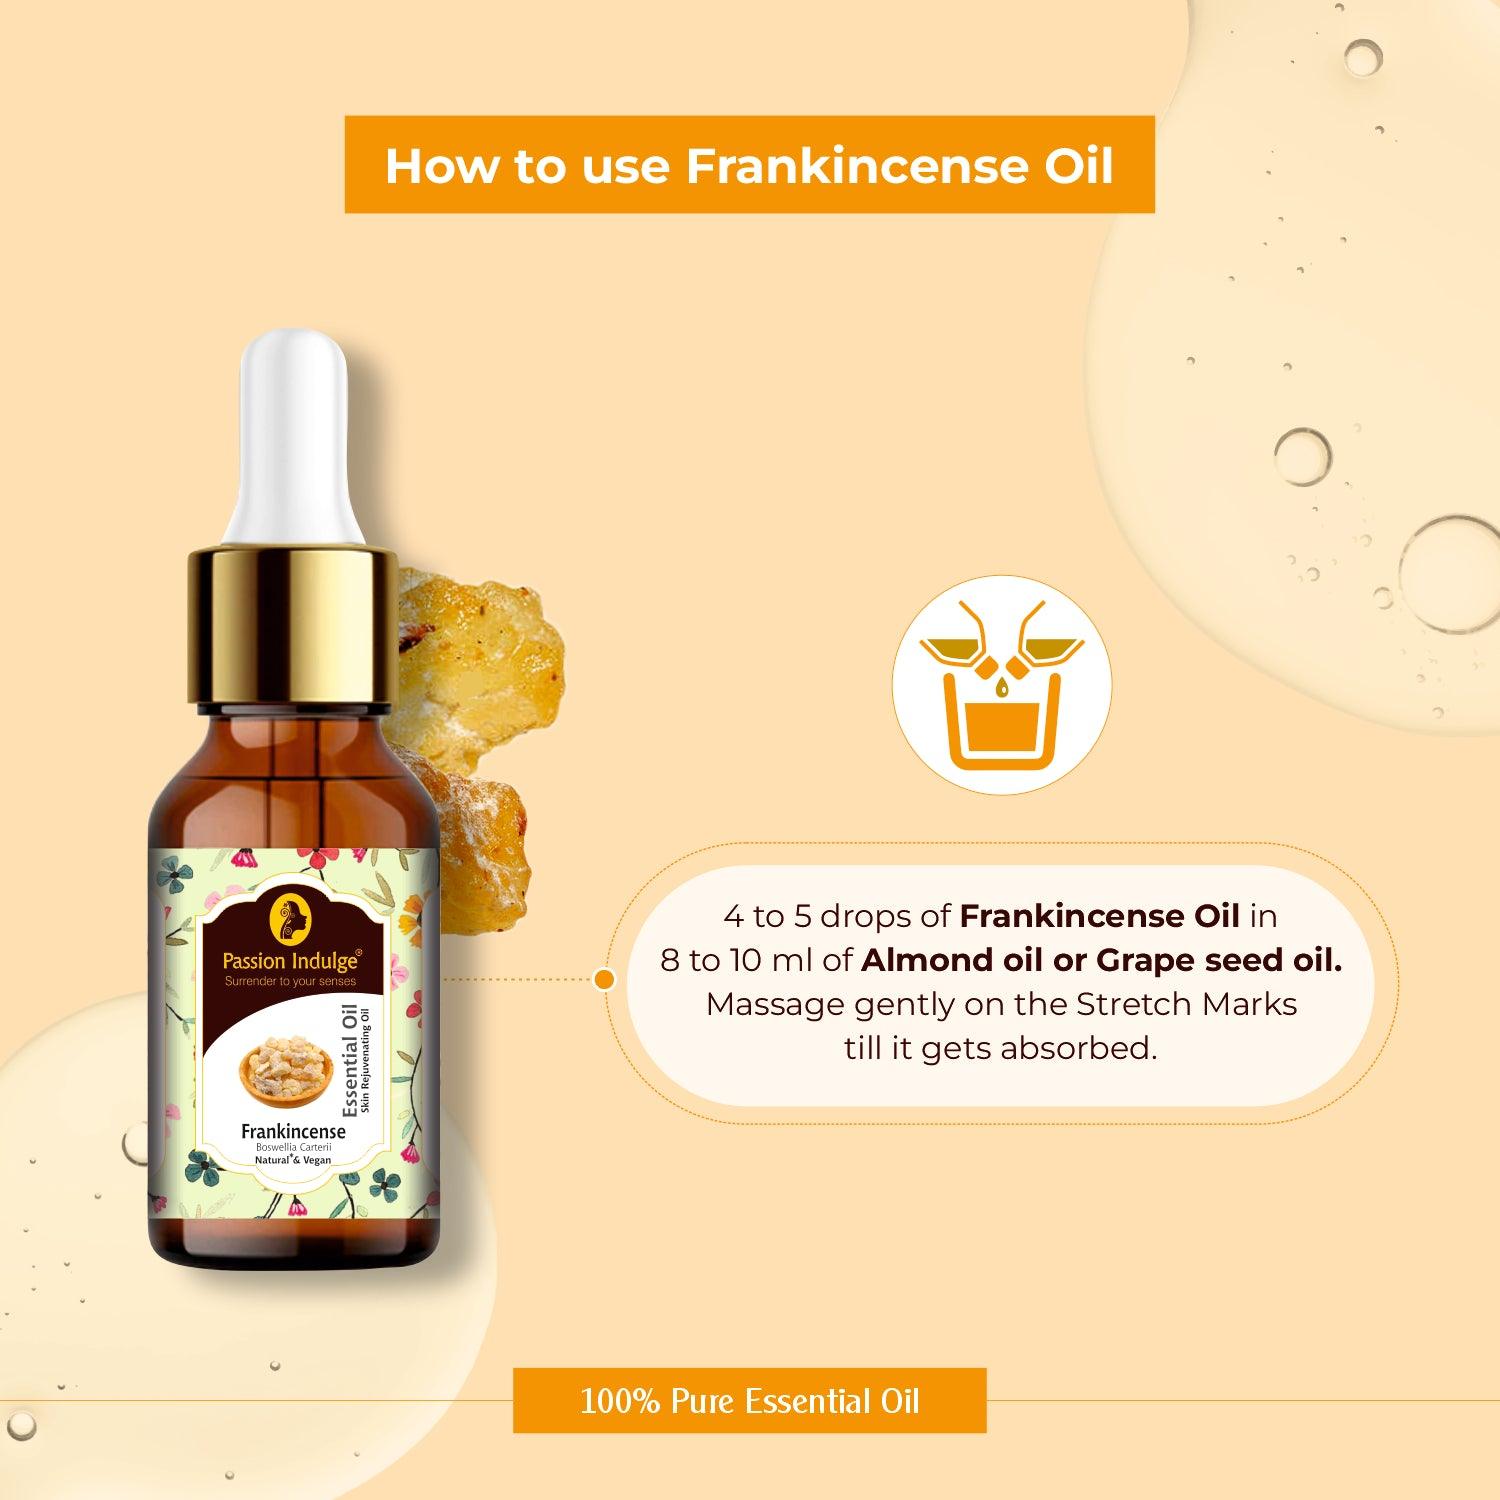 Frankincense Pure Essential Oil 10ml | skin Rejuvenating for Ageing Skin, helps heals wounds & Scars | Ayurvedic | Natural & Vegan | All Skin Type - passionindulge